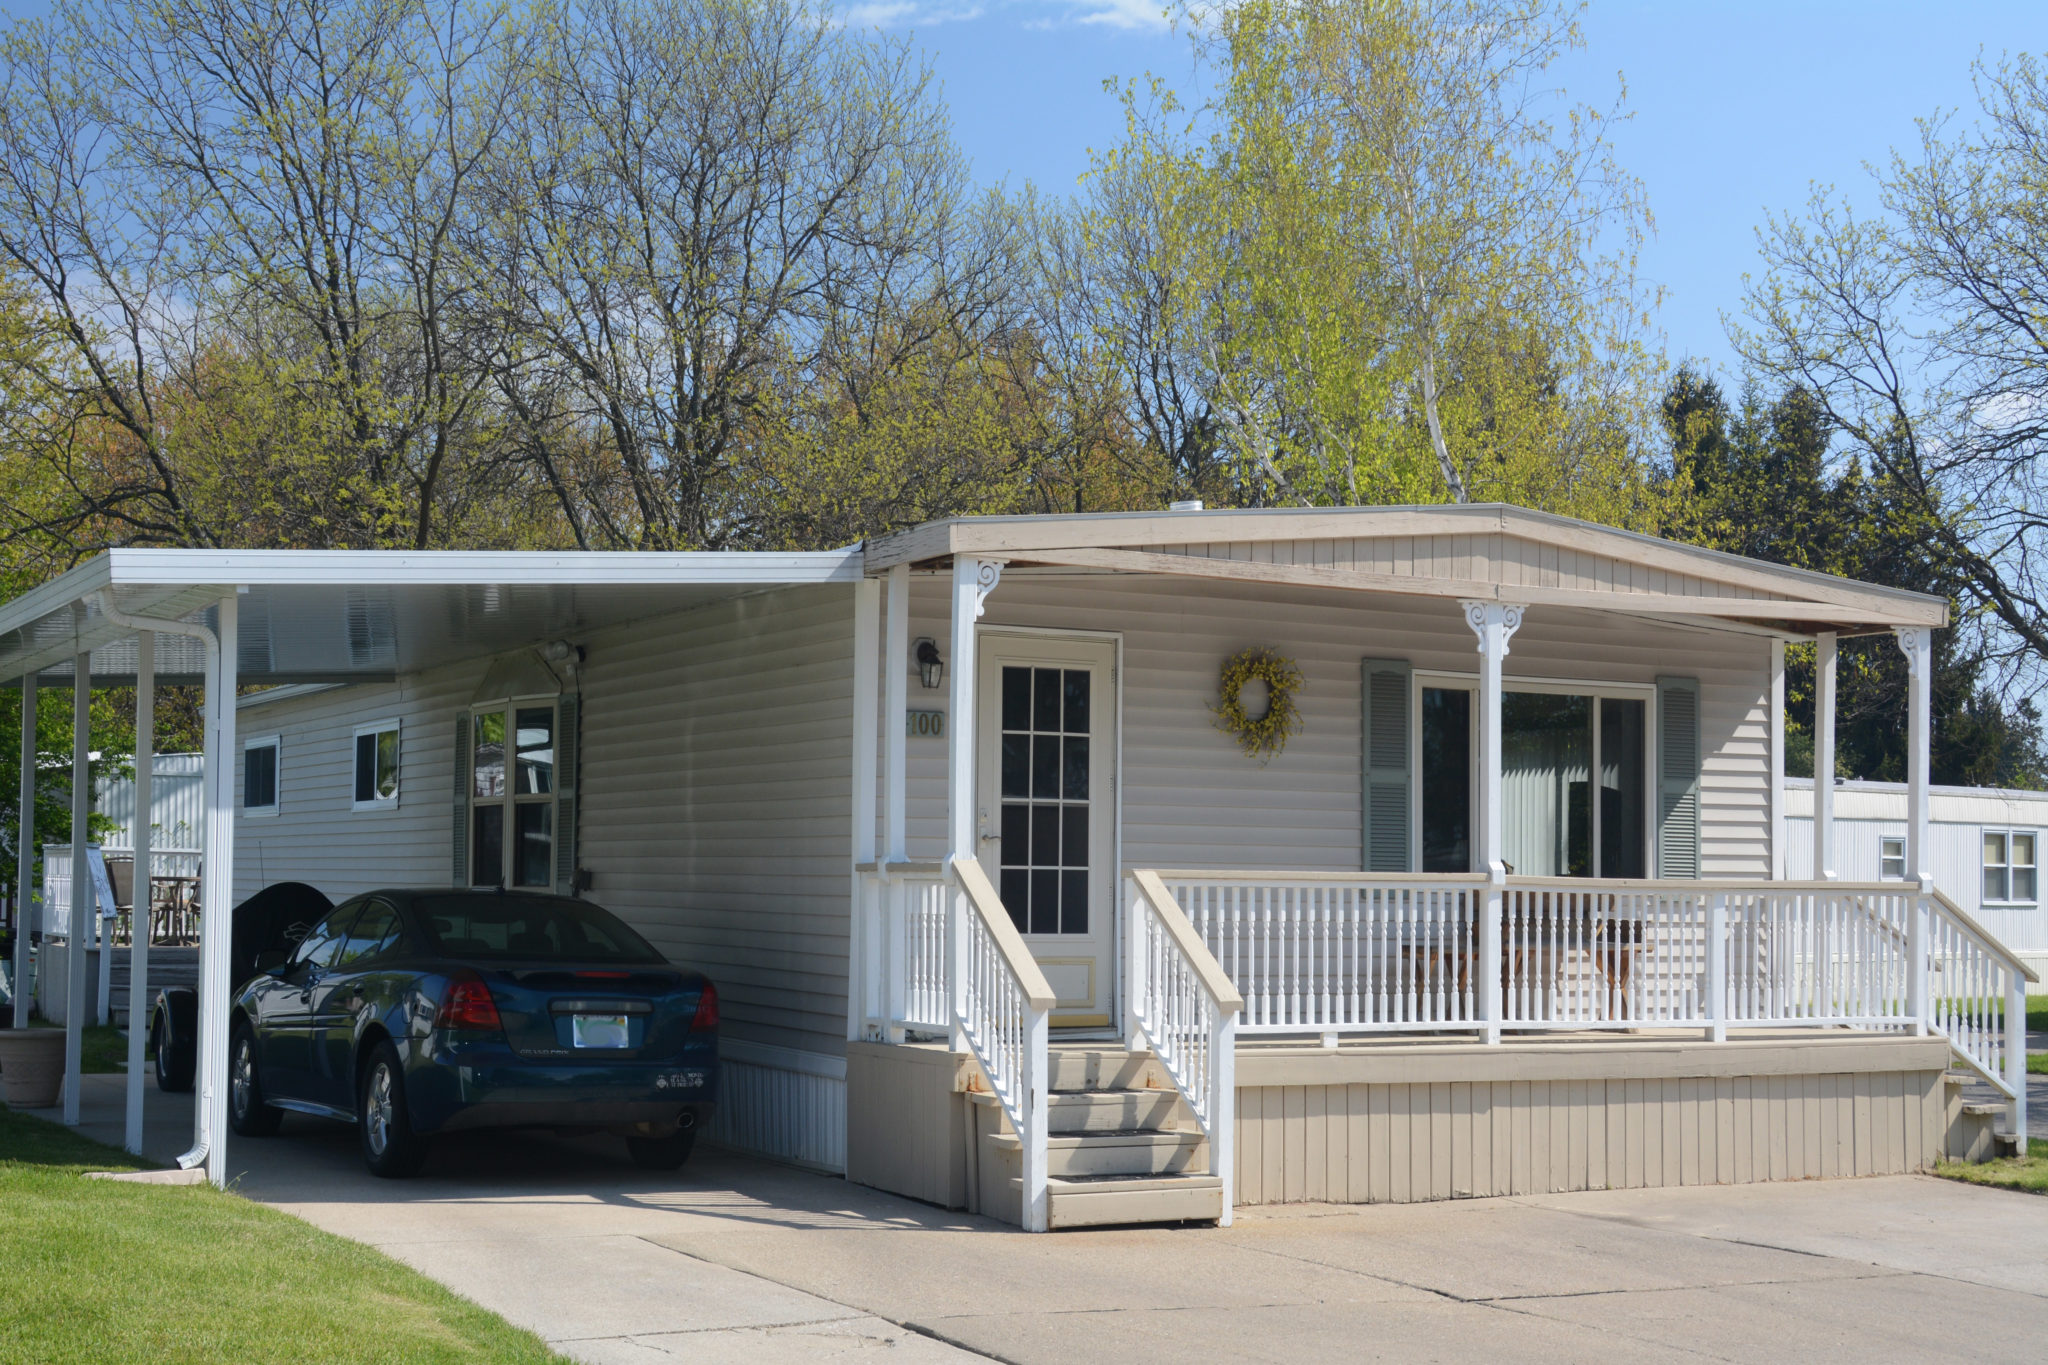 Crestview Manor Mobile Home